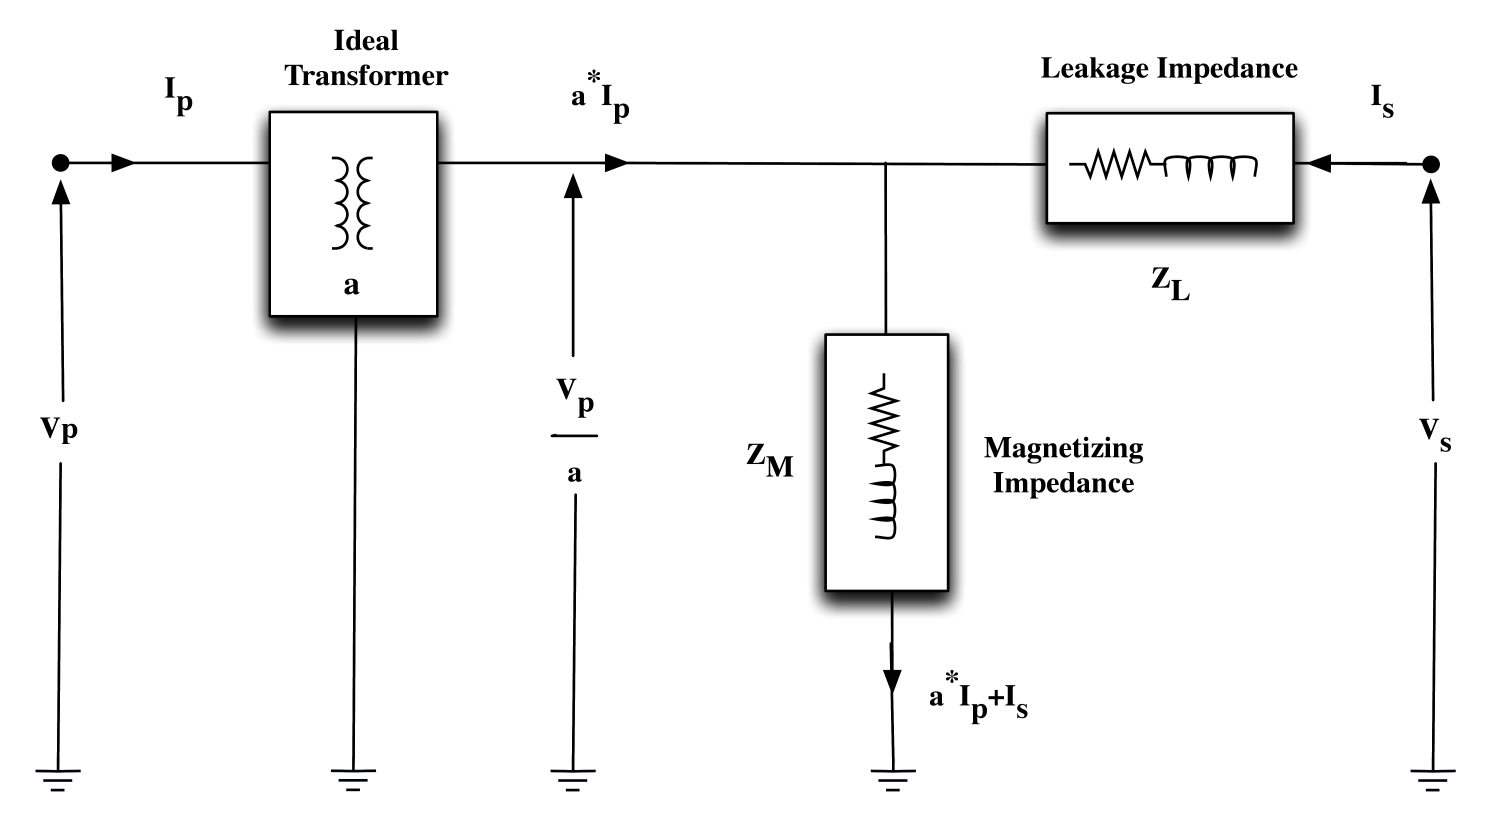 Diagram of the equivalent circuit of a two winding transformer consisting of an ideal transformer, a leakage impedance, and a magnetizing impedance.